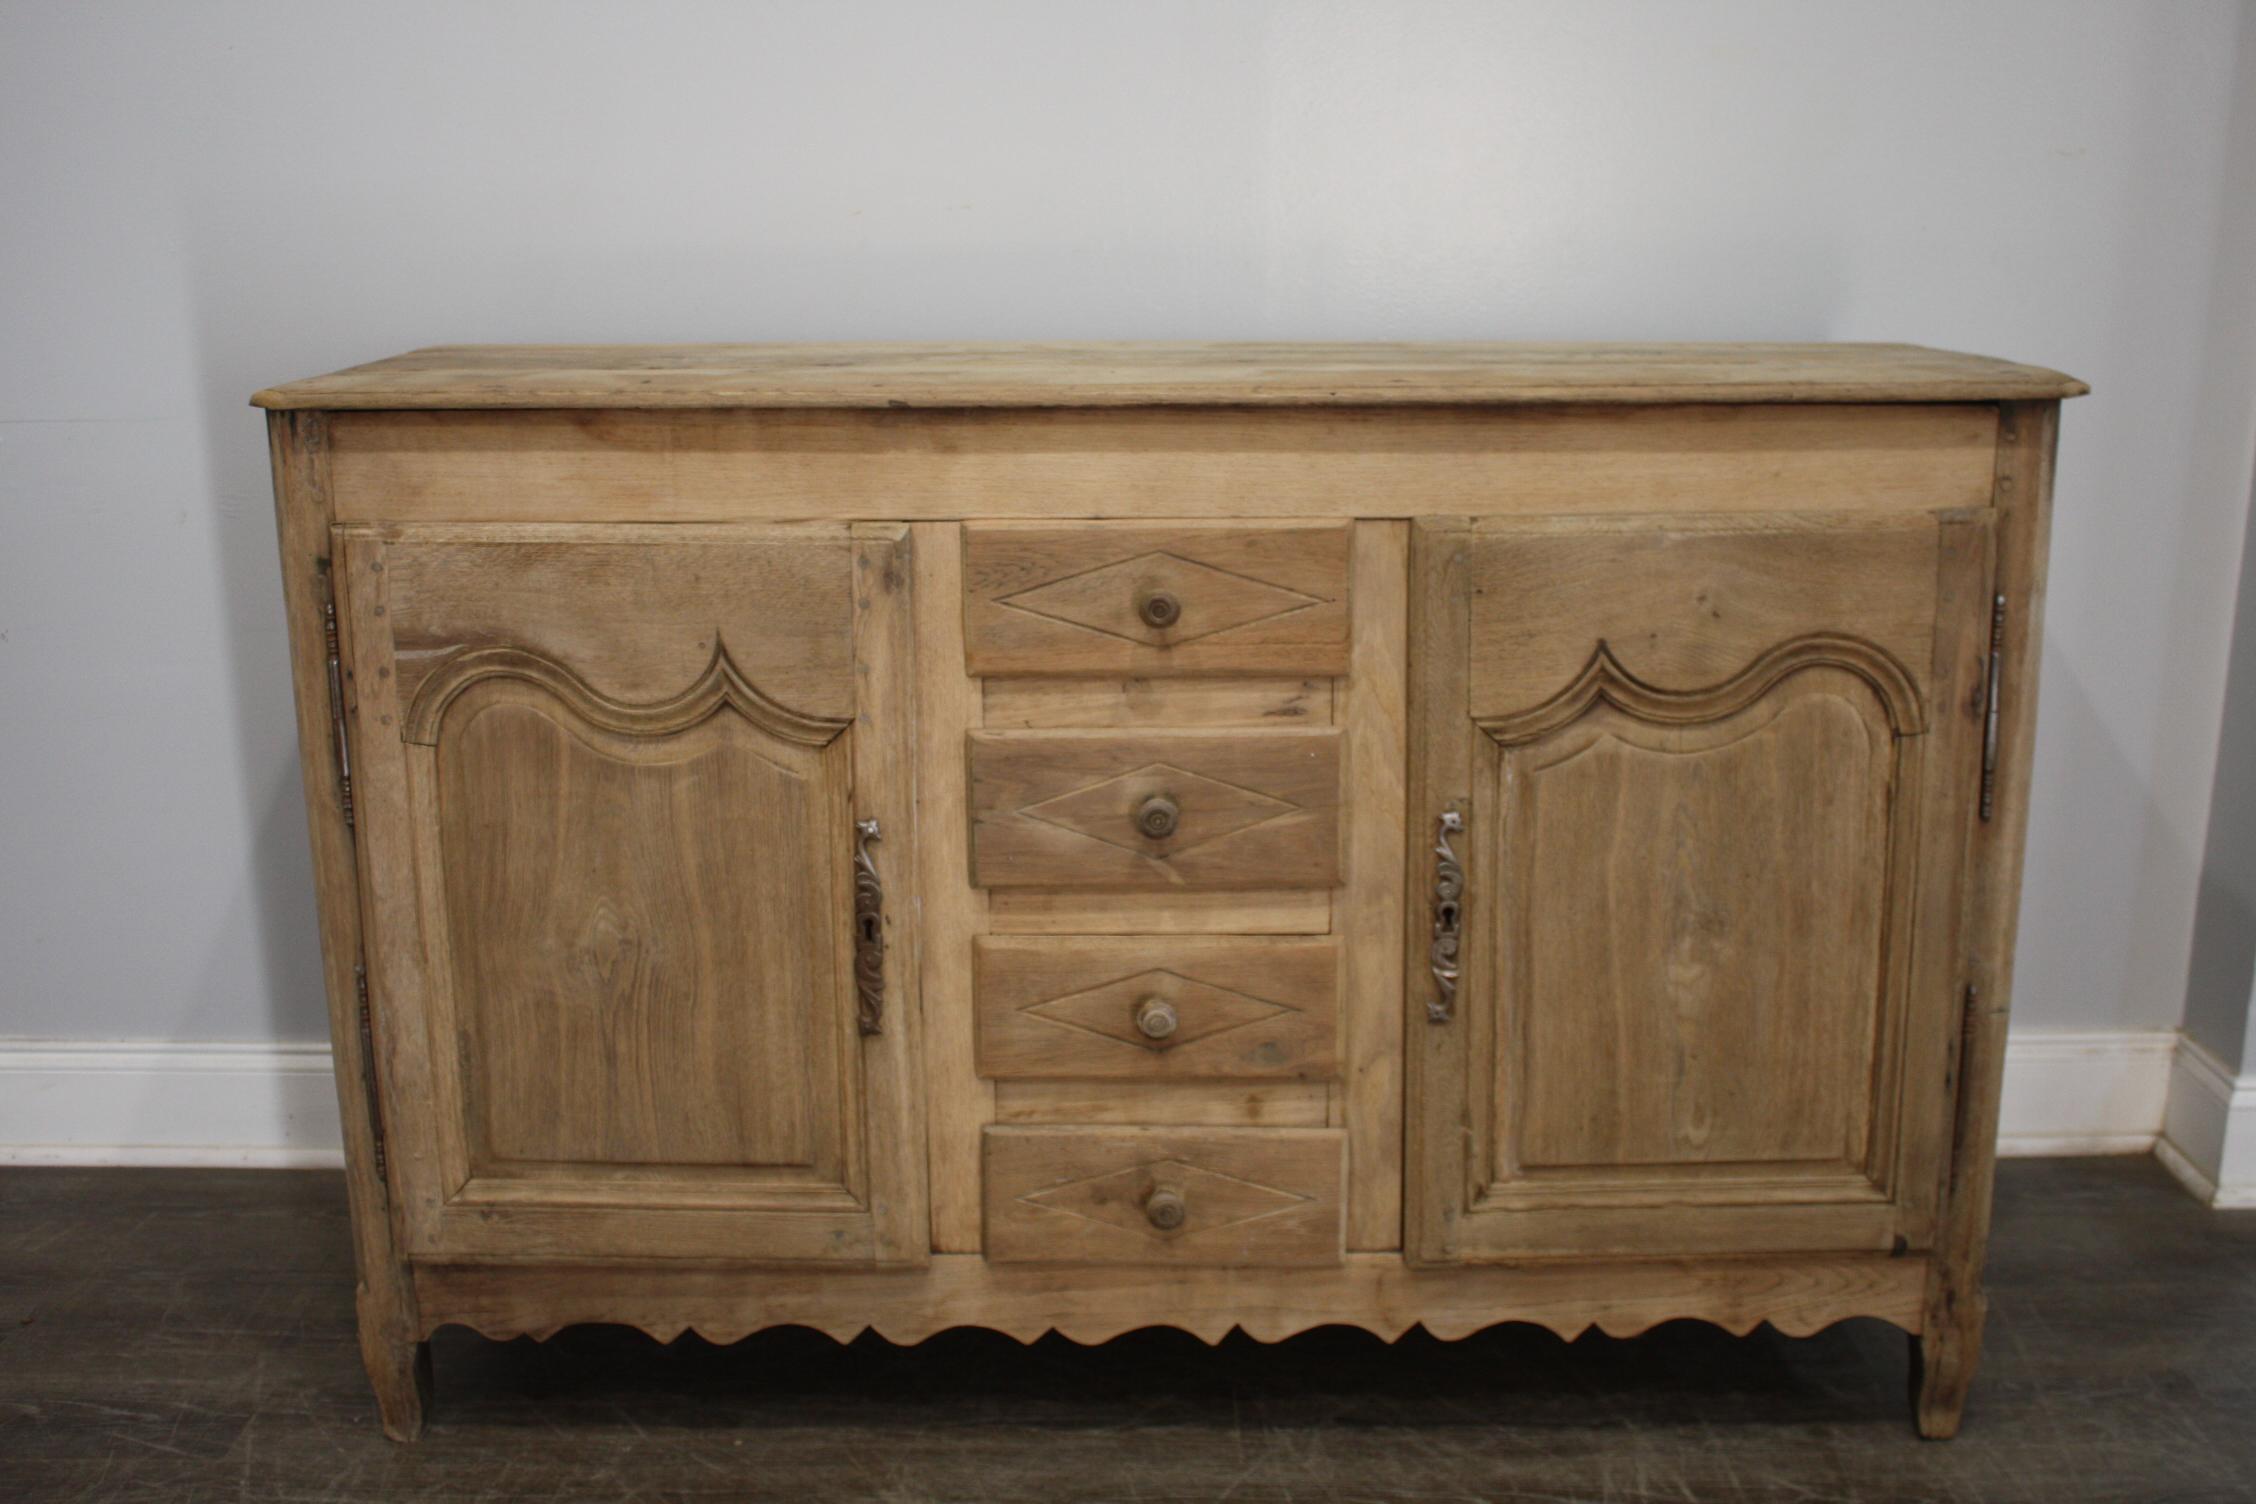 This sideboard is made of oak and has been refinished. It is narrow and can be placed anywhere in a home.
